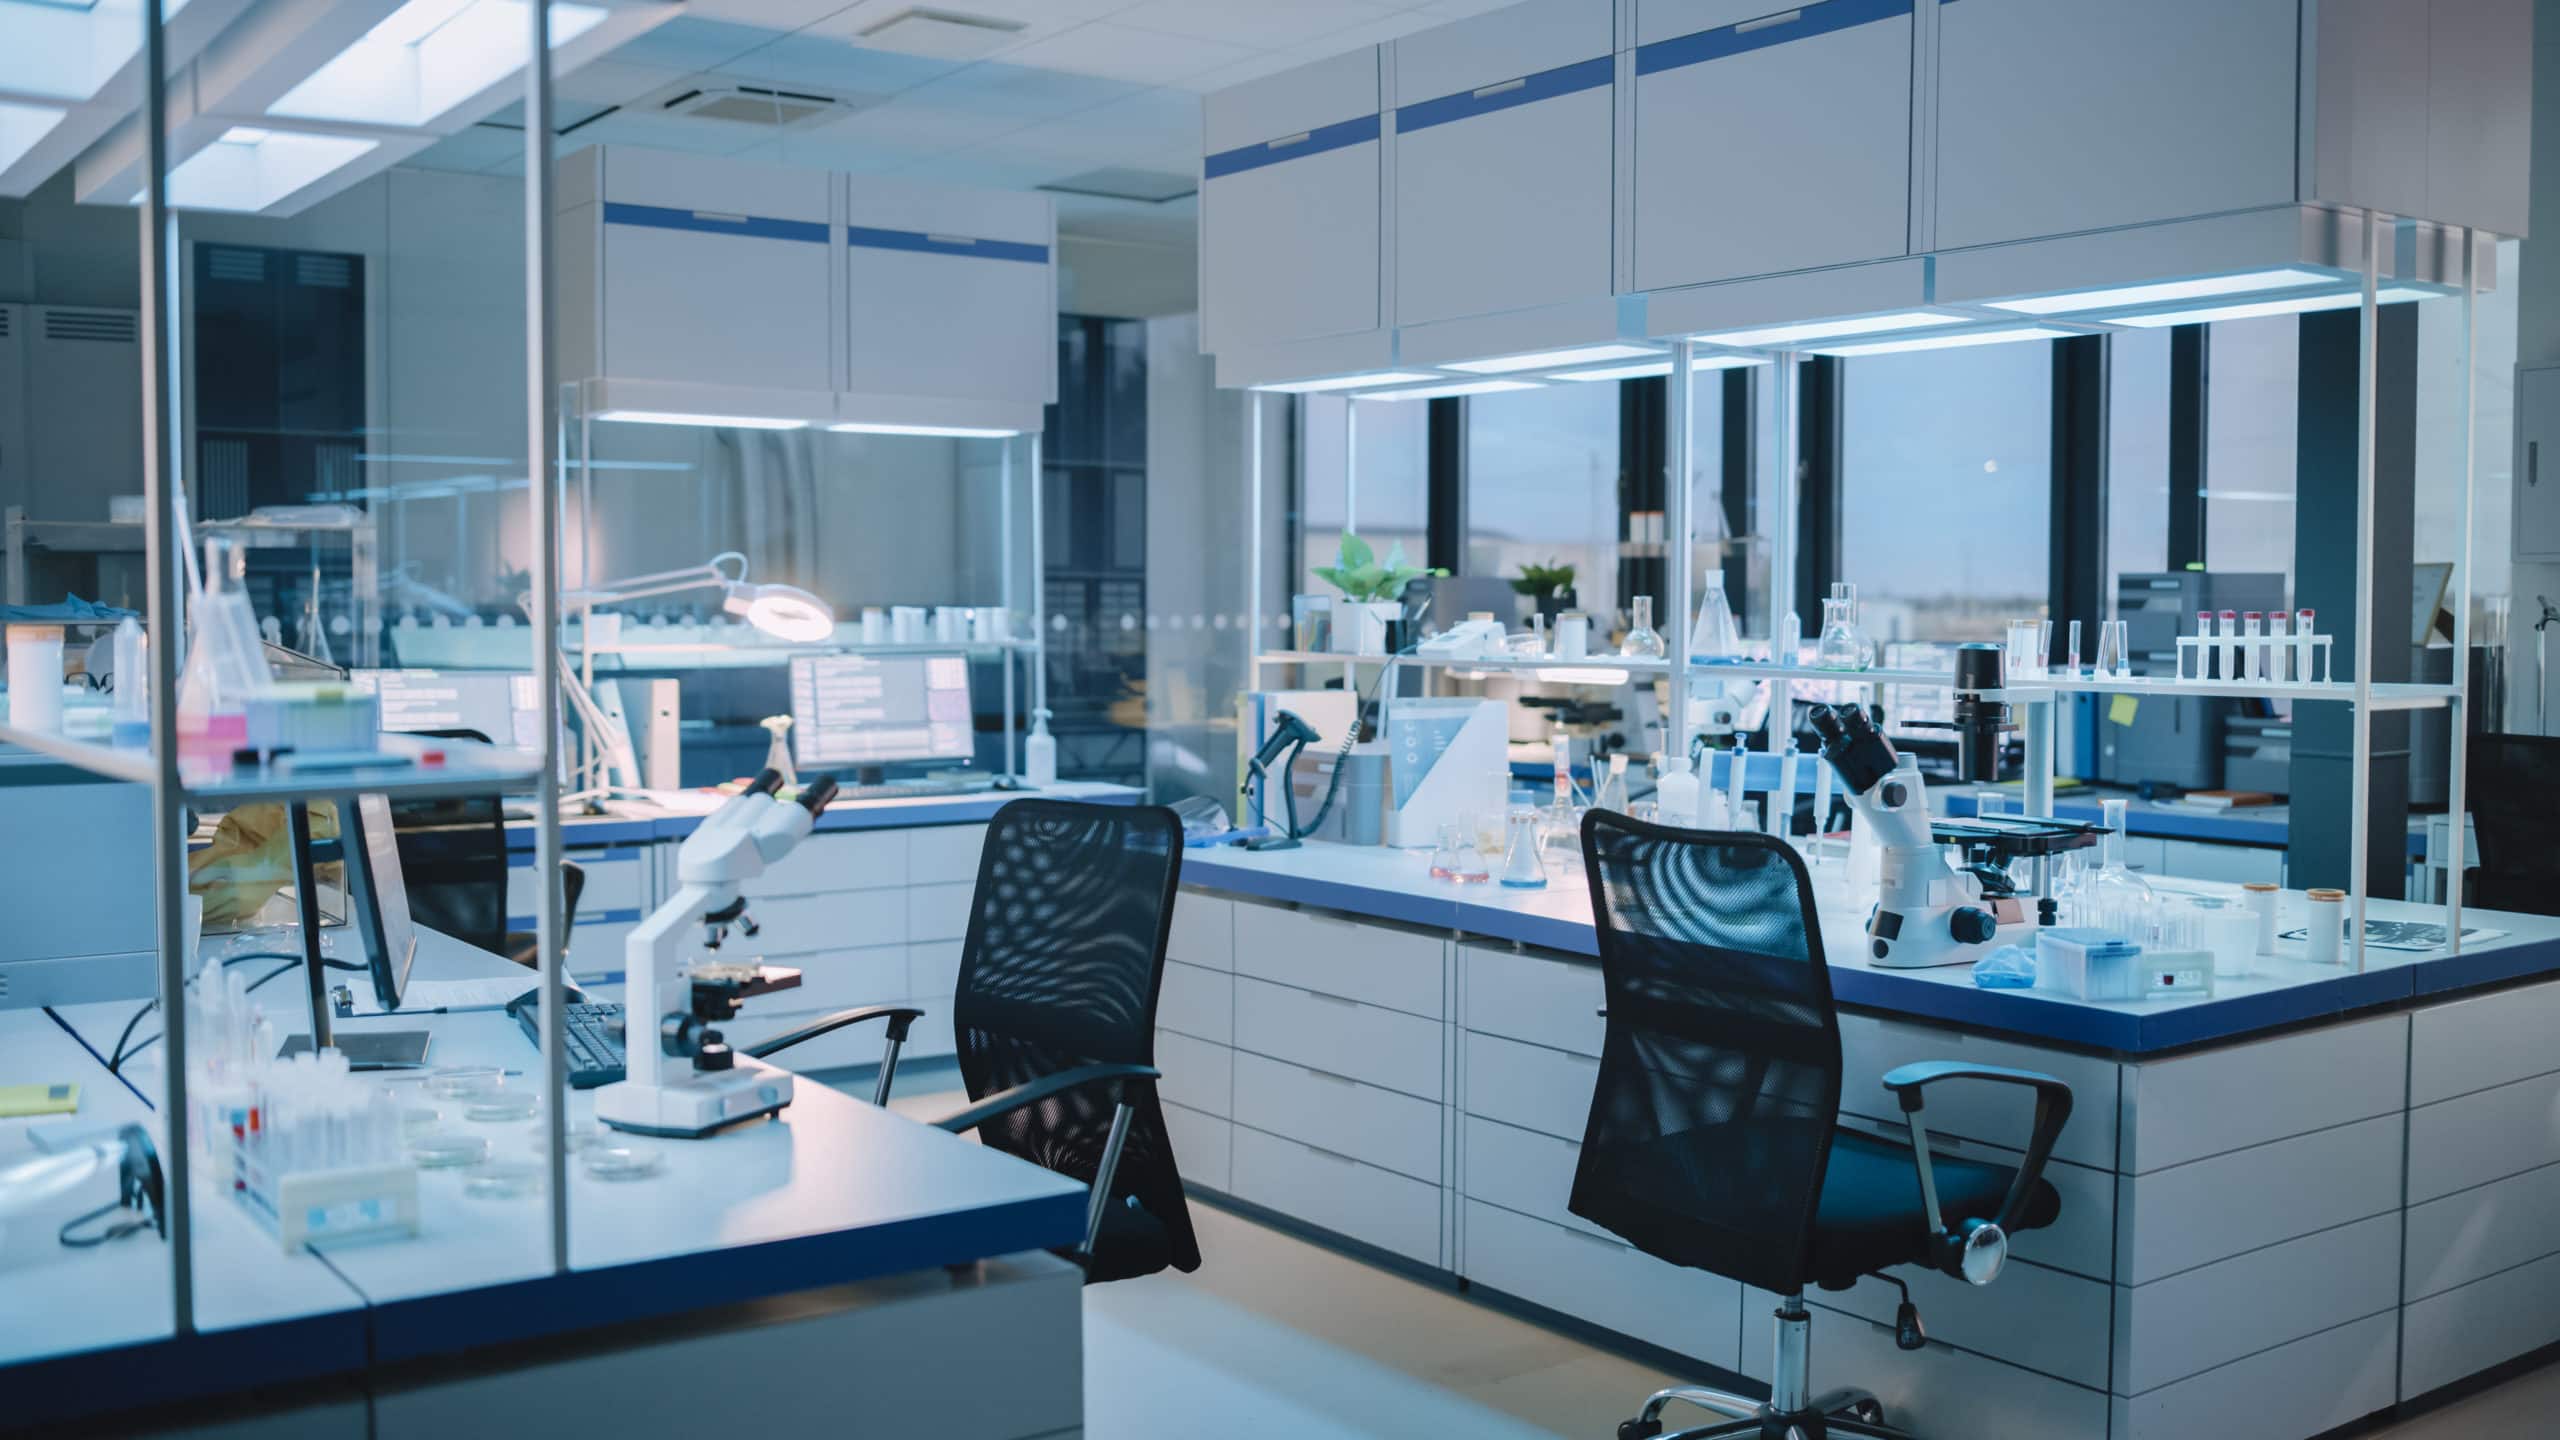 Learn more about Laboratory Furniture